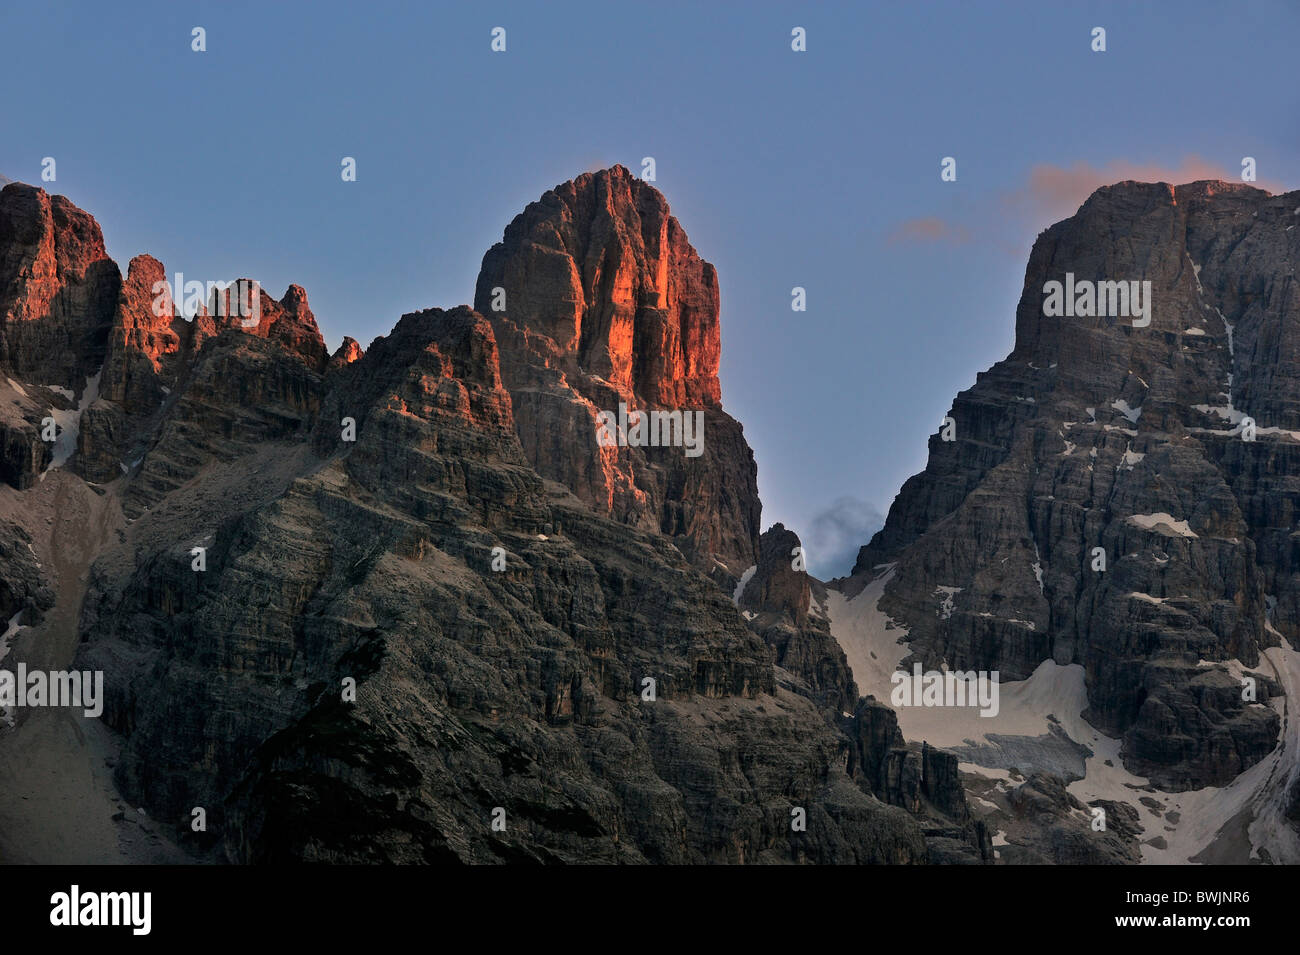 Alpenglow at sunset over the mountain Monte Cristallo in the Dolomites, Italy Stock Photo